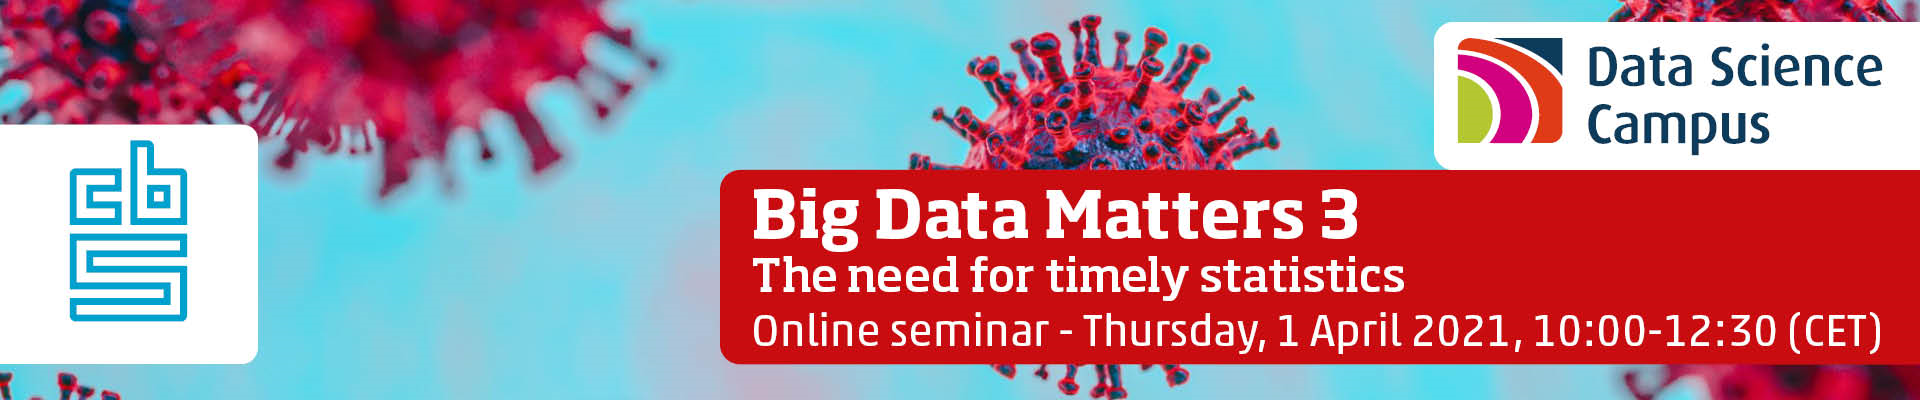 Banner seminar big data matters 3 the need for timely data 1 april 2021